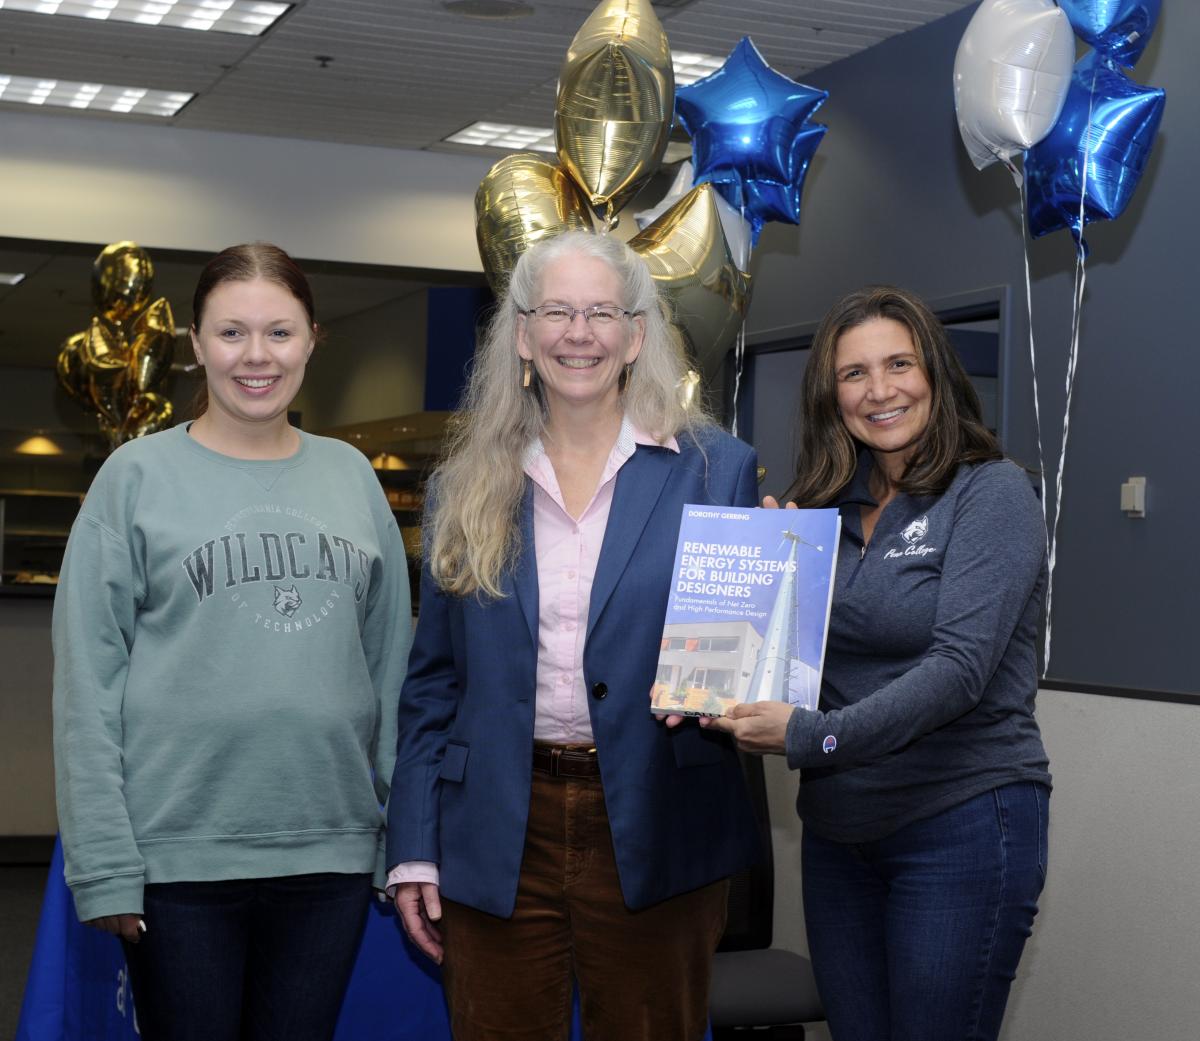 The author (center) is joined at her book-signing by two supportive members of Women in Construction: Amanda F. Ritter (left), enrolled in building science and sustainable design, and Sandra M. Gallick, an architecture and sustainable design student.